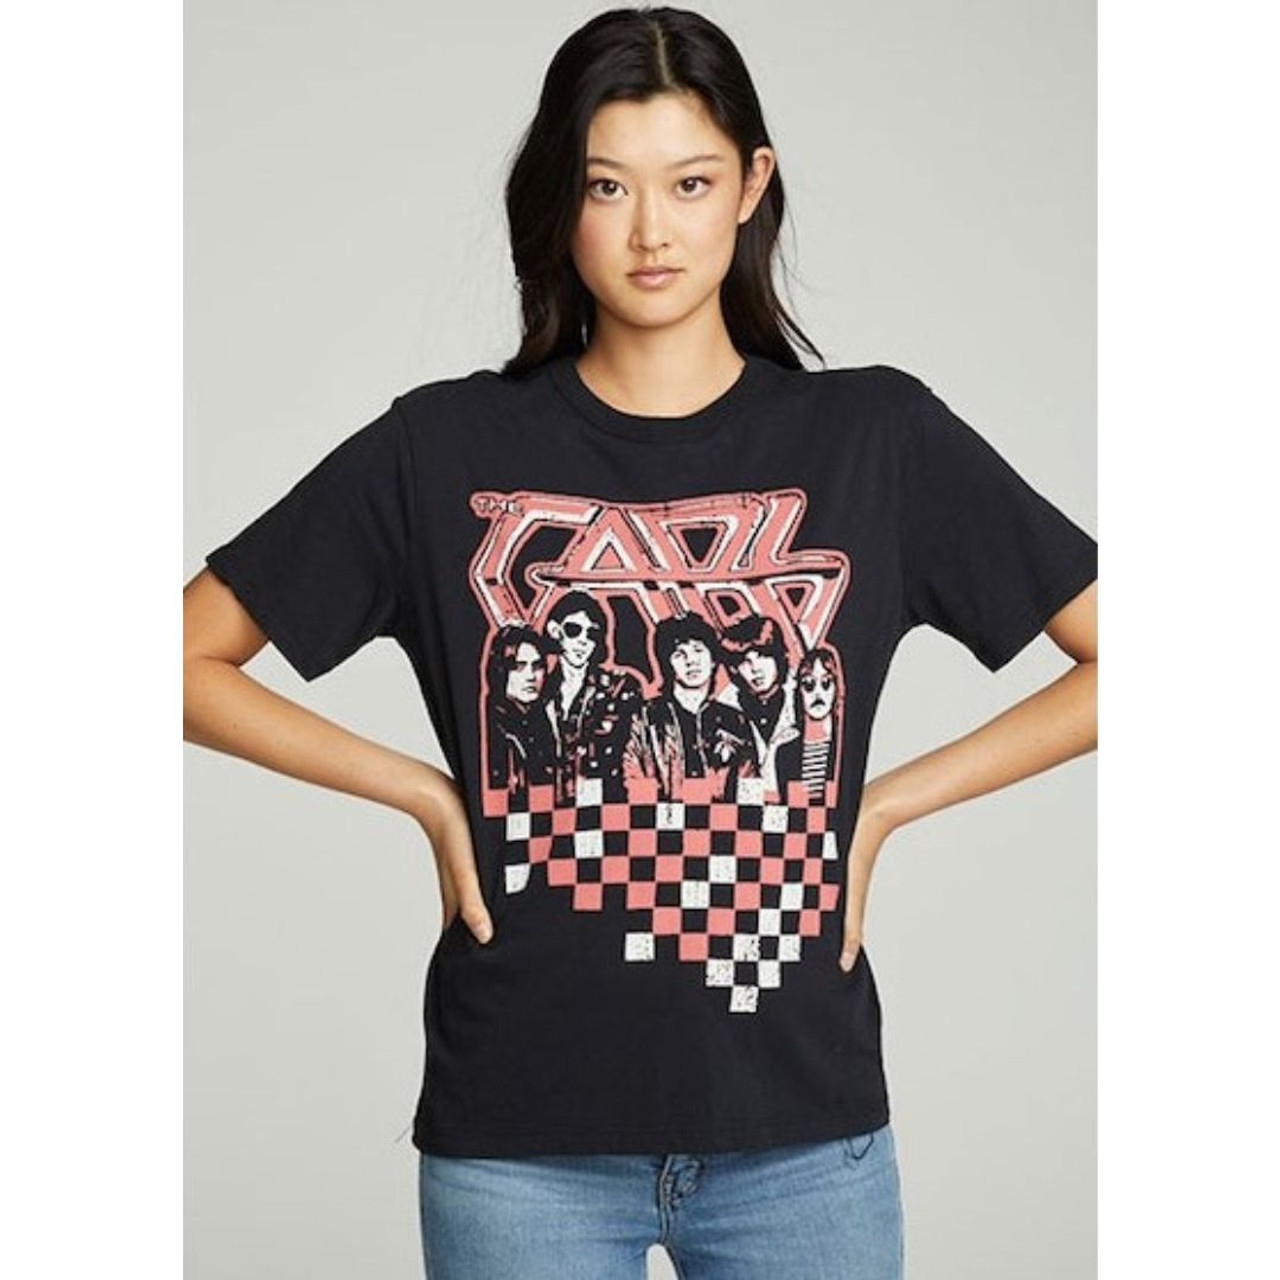 Præfiks Hændelse Shaded The Cars Band Members & Logo Women's Fashion Chaser T-shirt